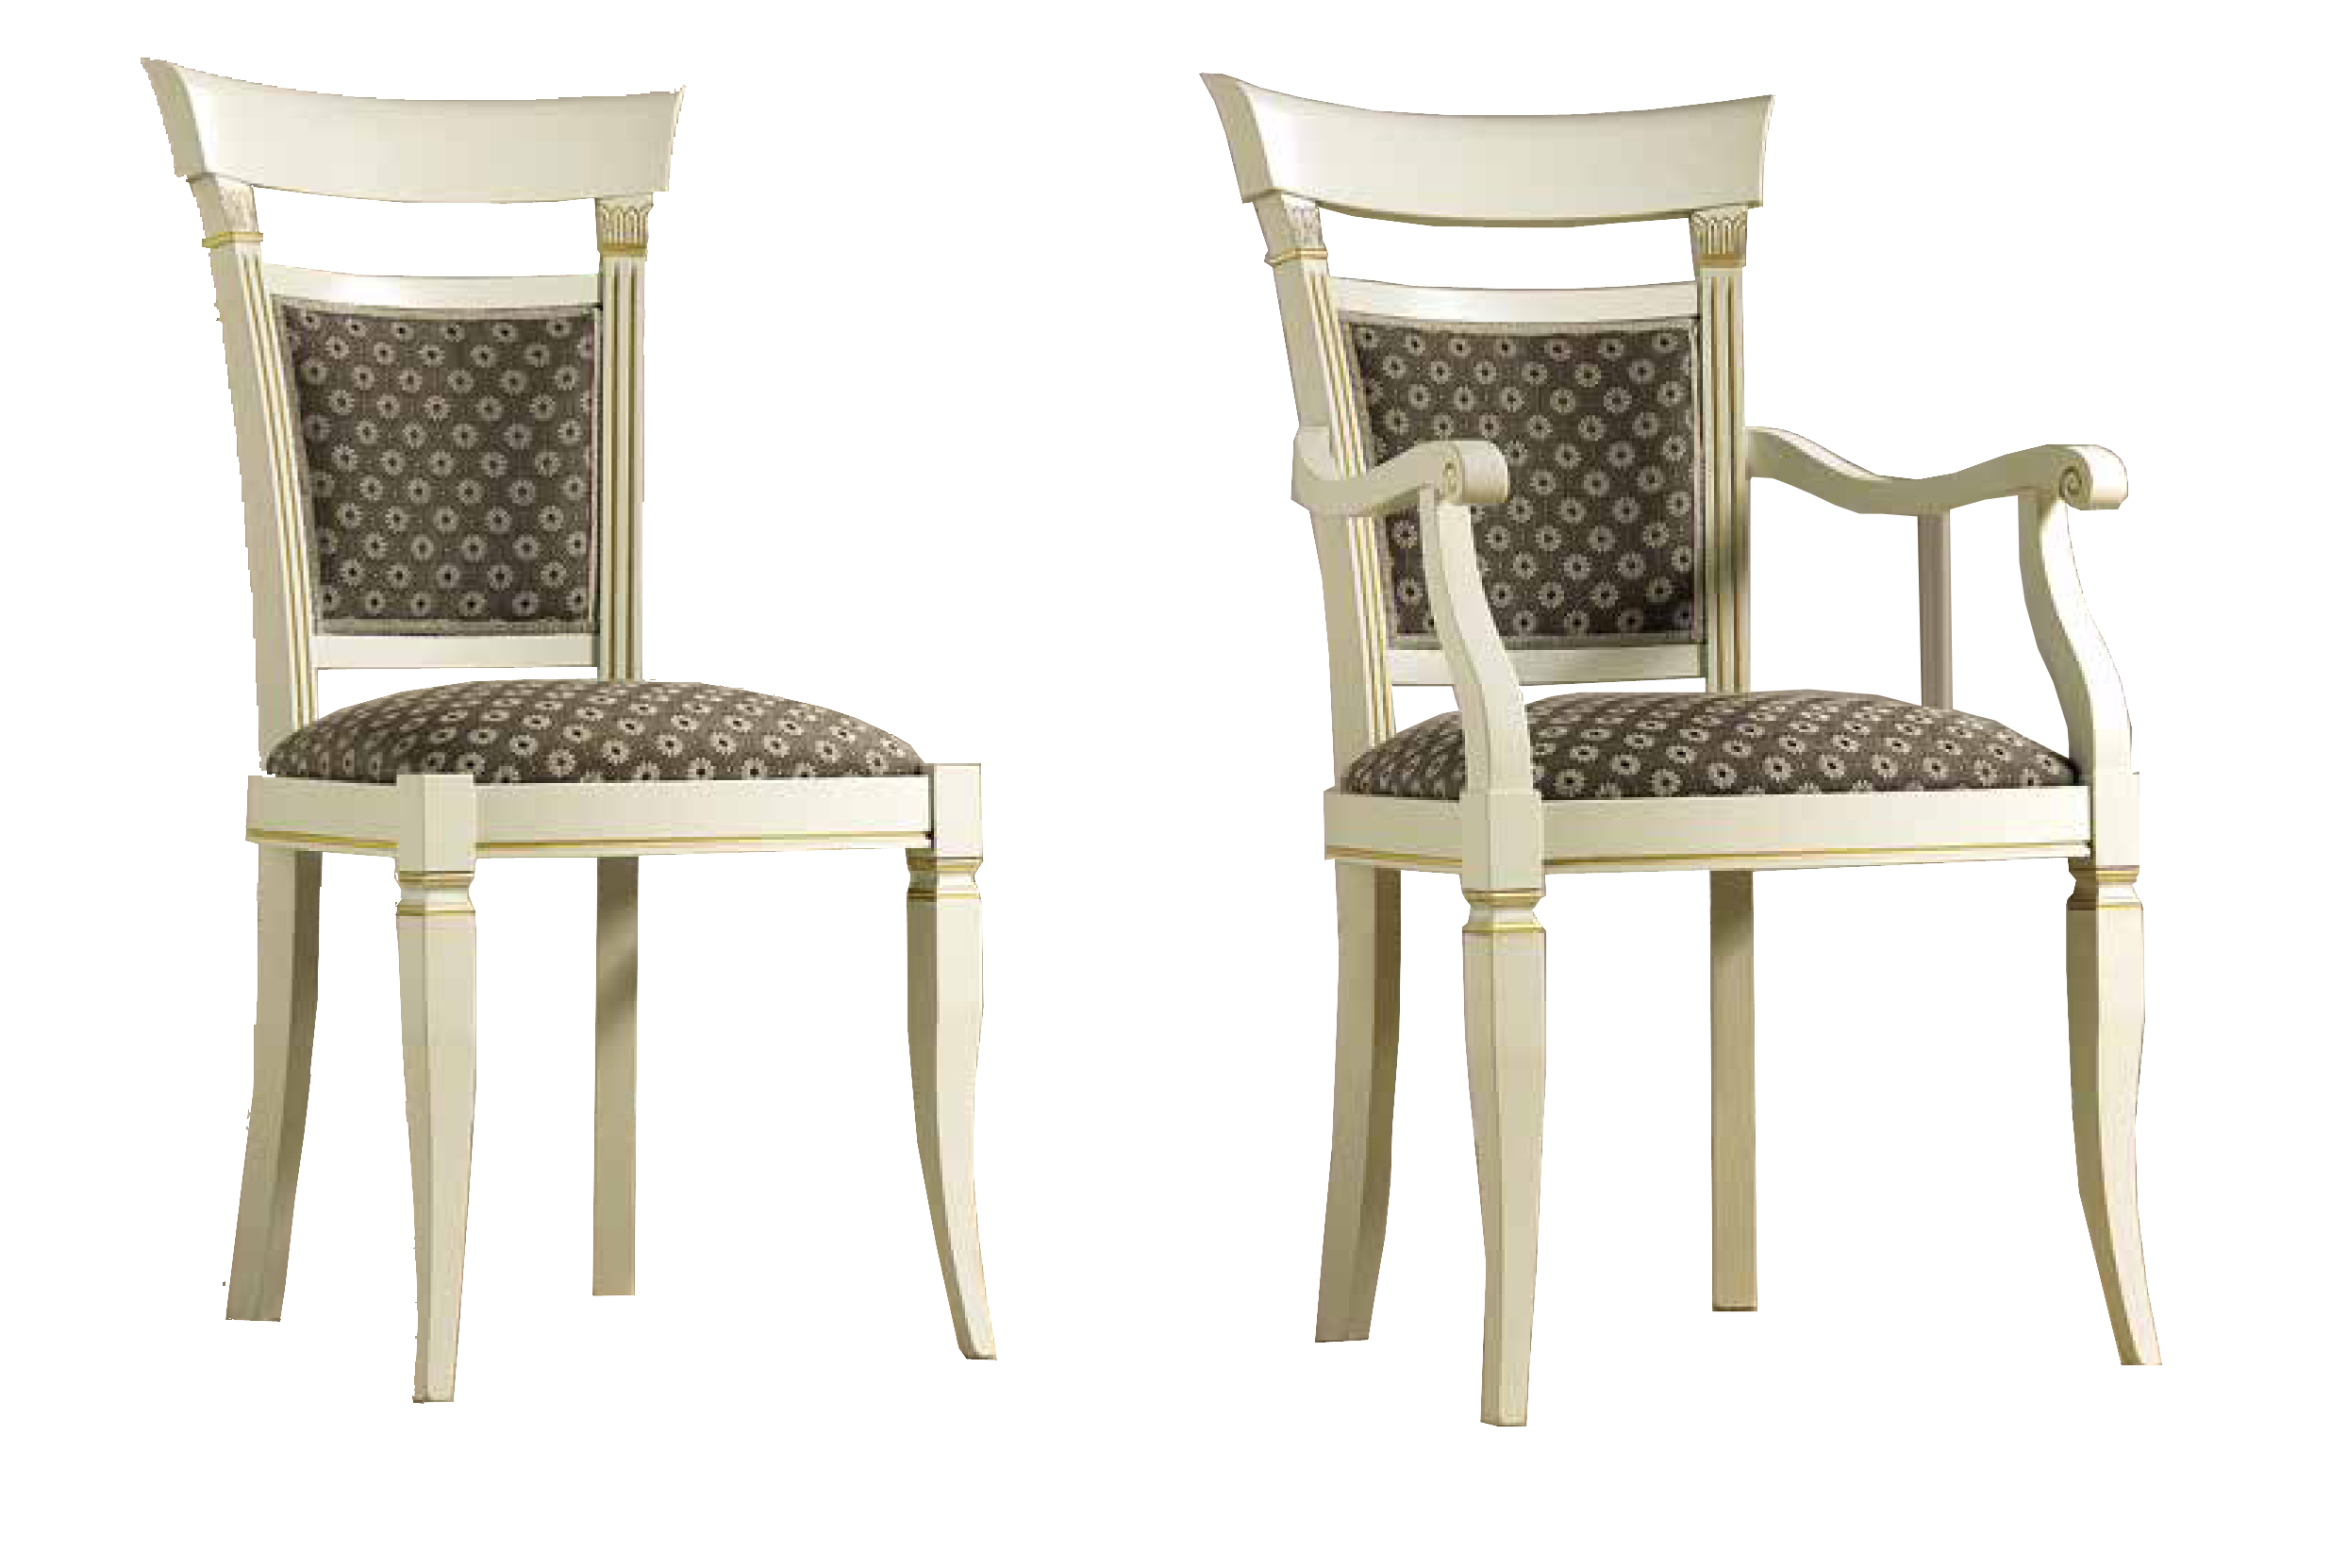 Brands Camel Gold Collection, Italy Treviso Chairs White Ash